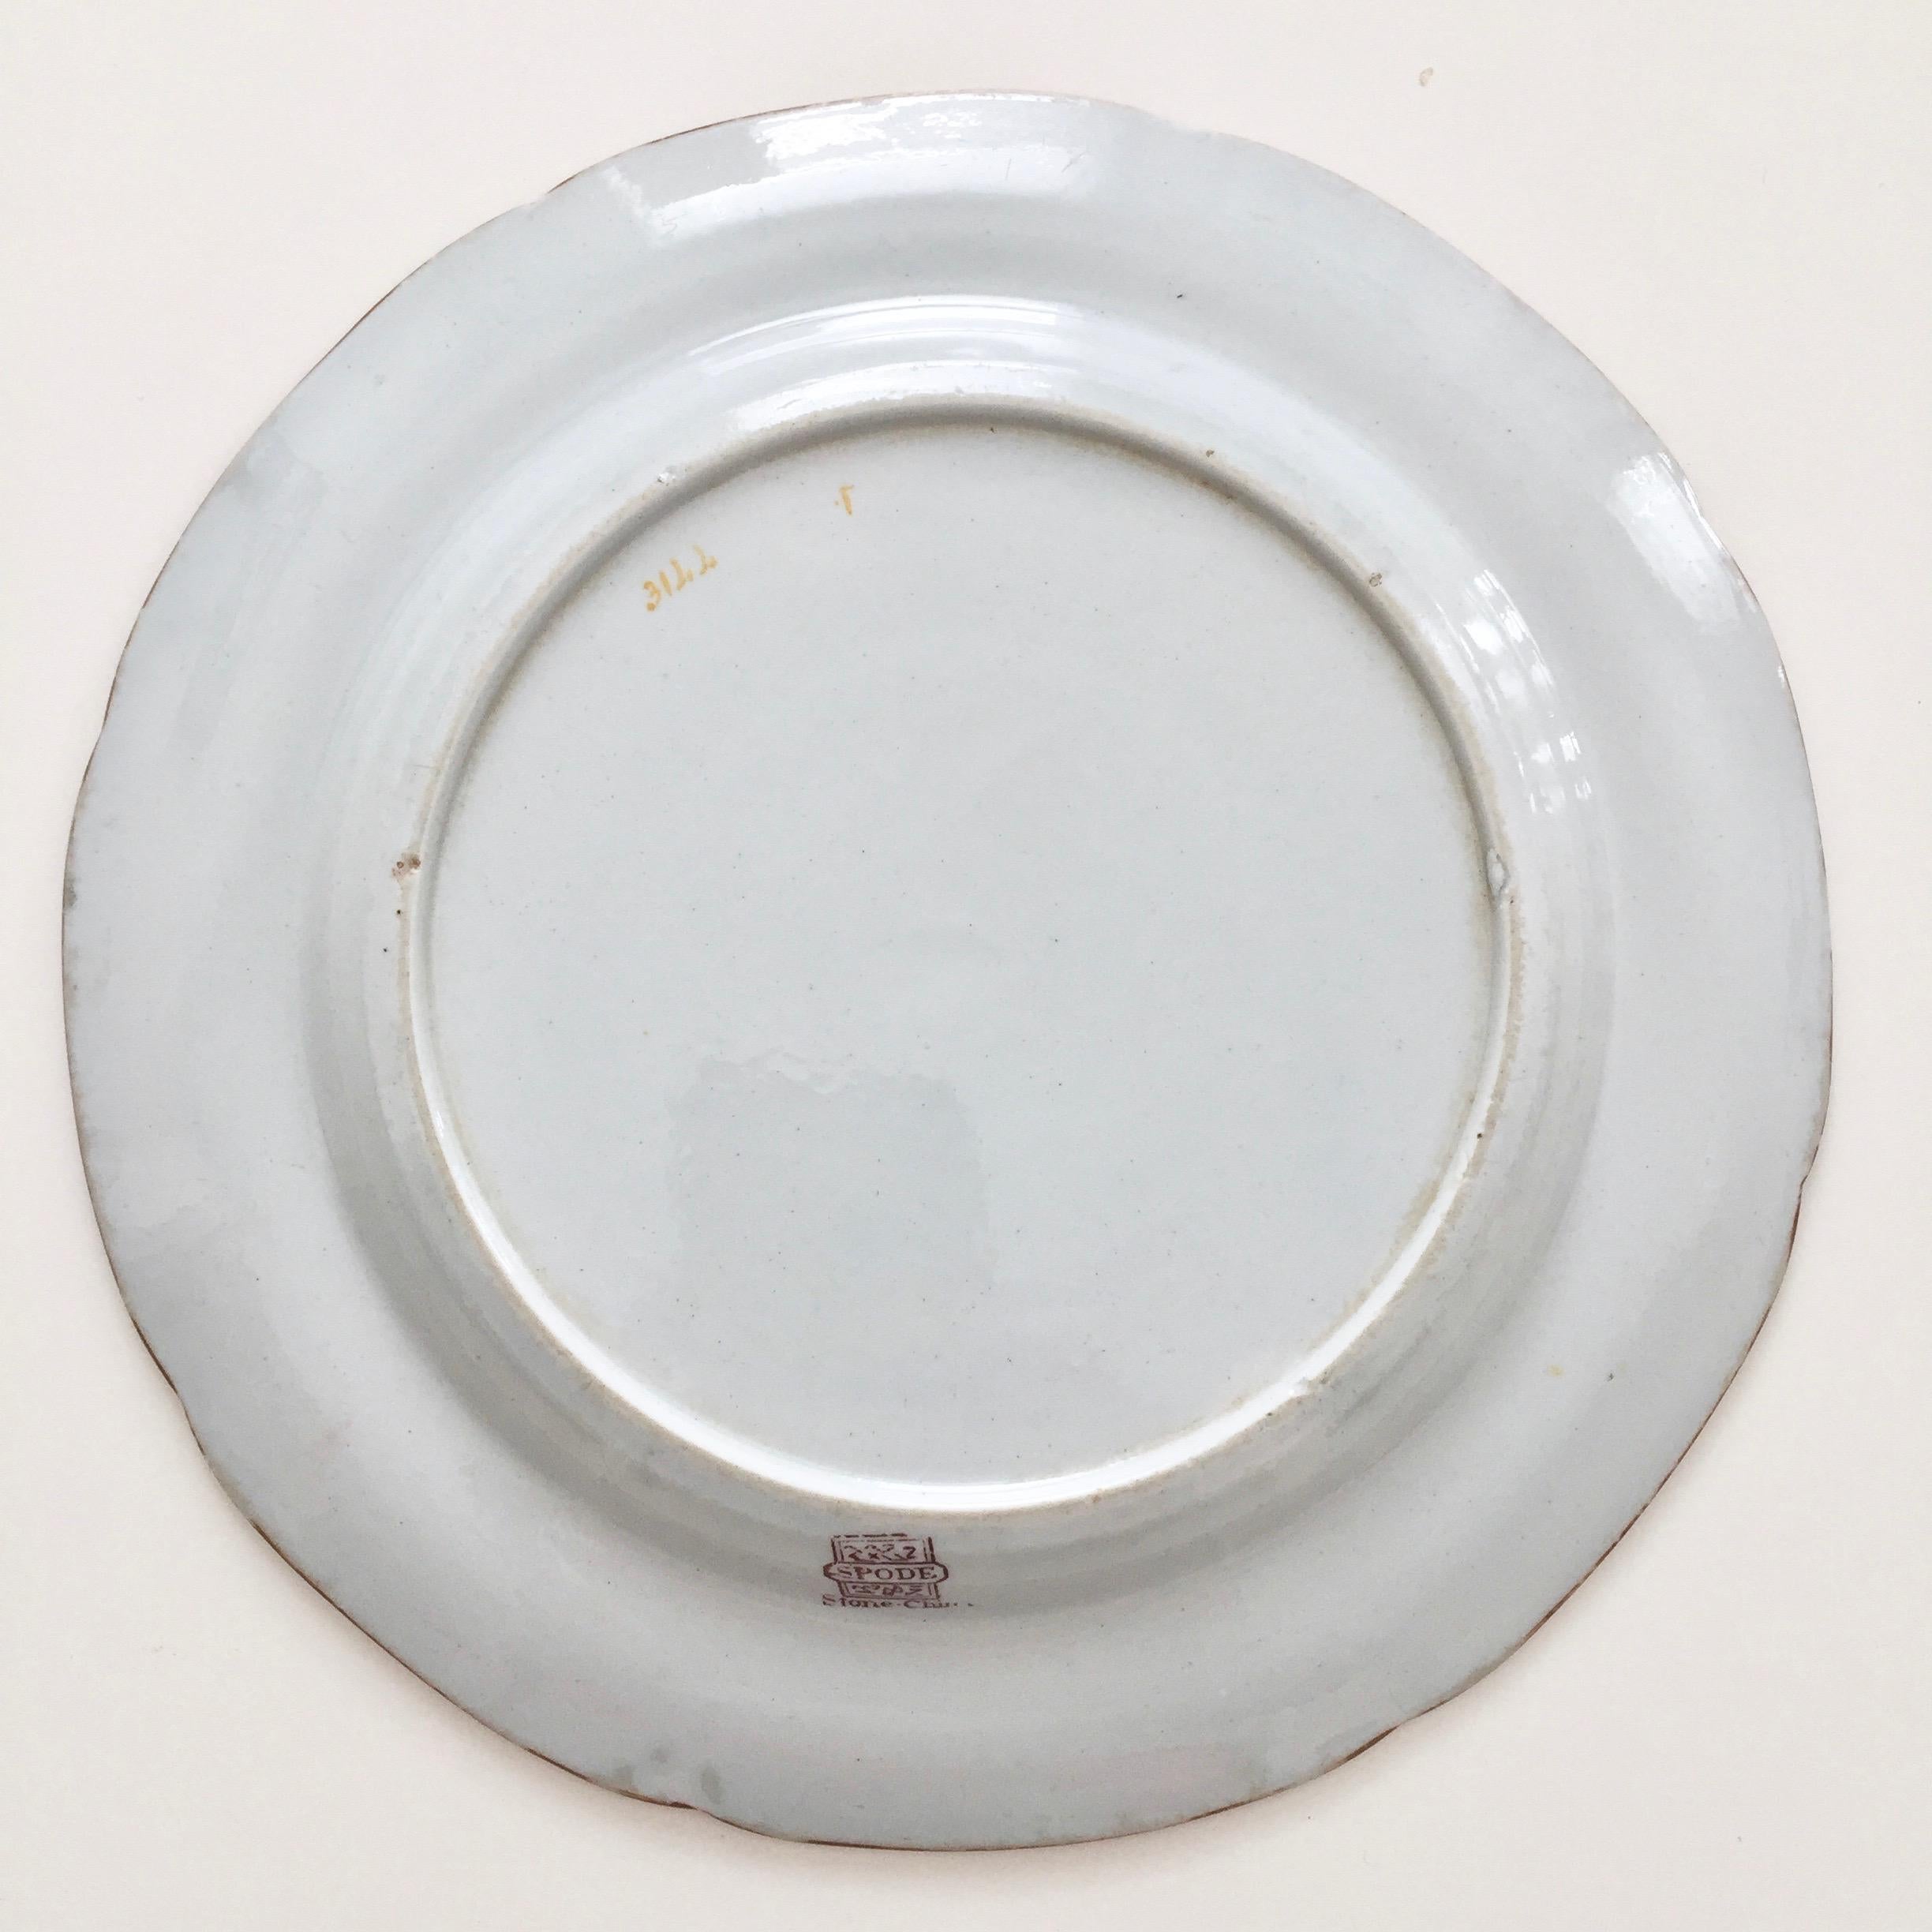 Early 19th Century Spode Stone China Plate, Pink Japan Pattern No. 3144, Regency 1812-1833